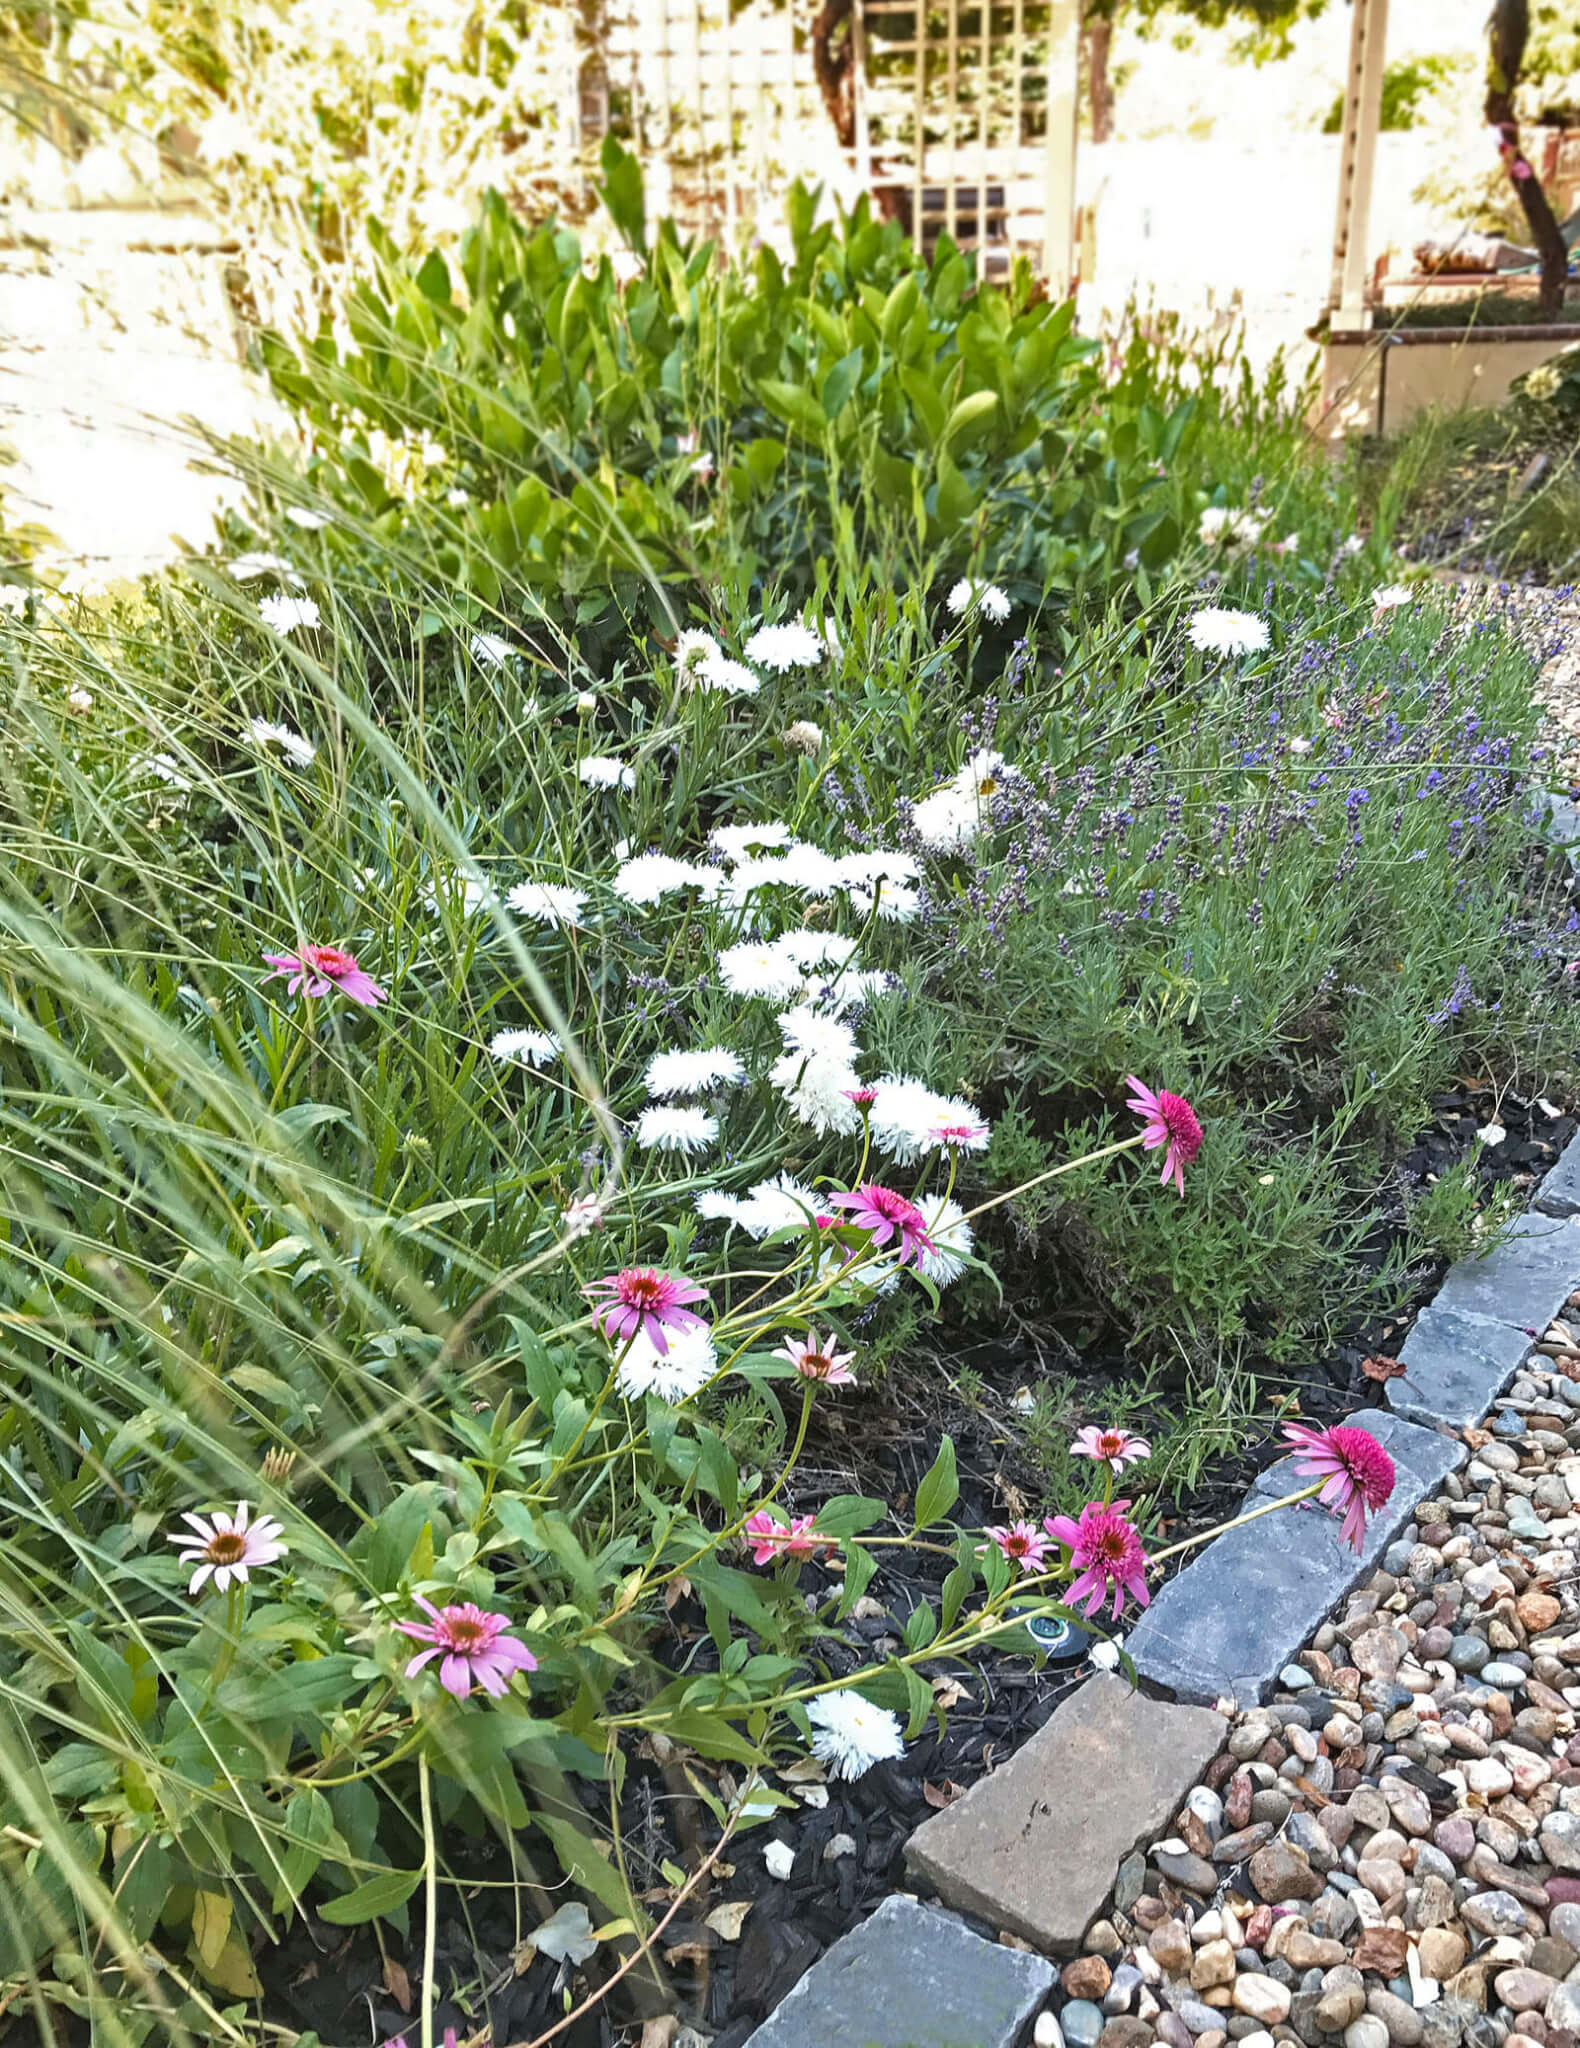 White and pink flowers mixed with lavender in garden bed next to rock-lined river pebble walkway